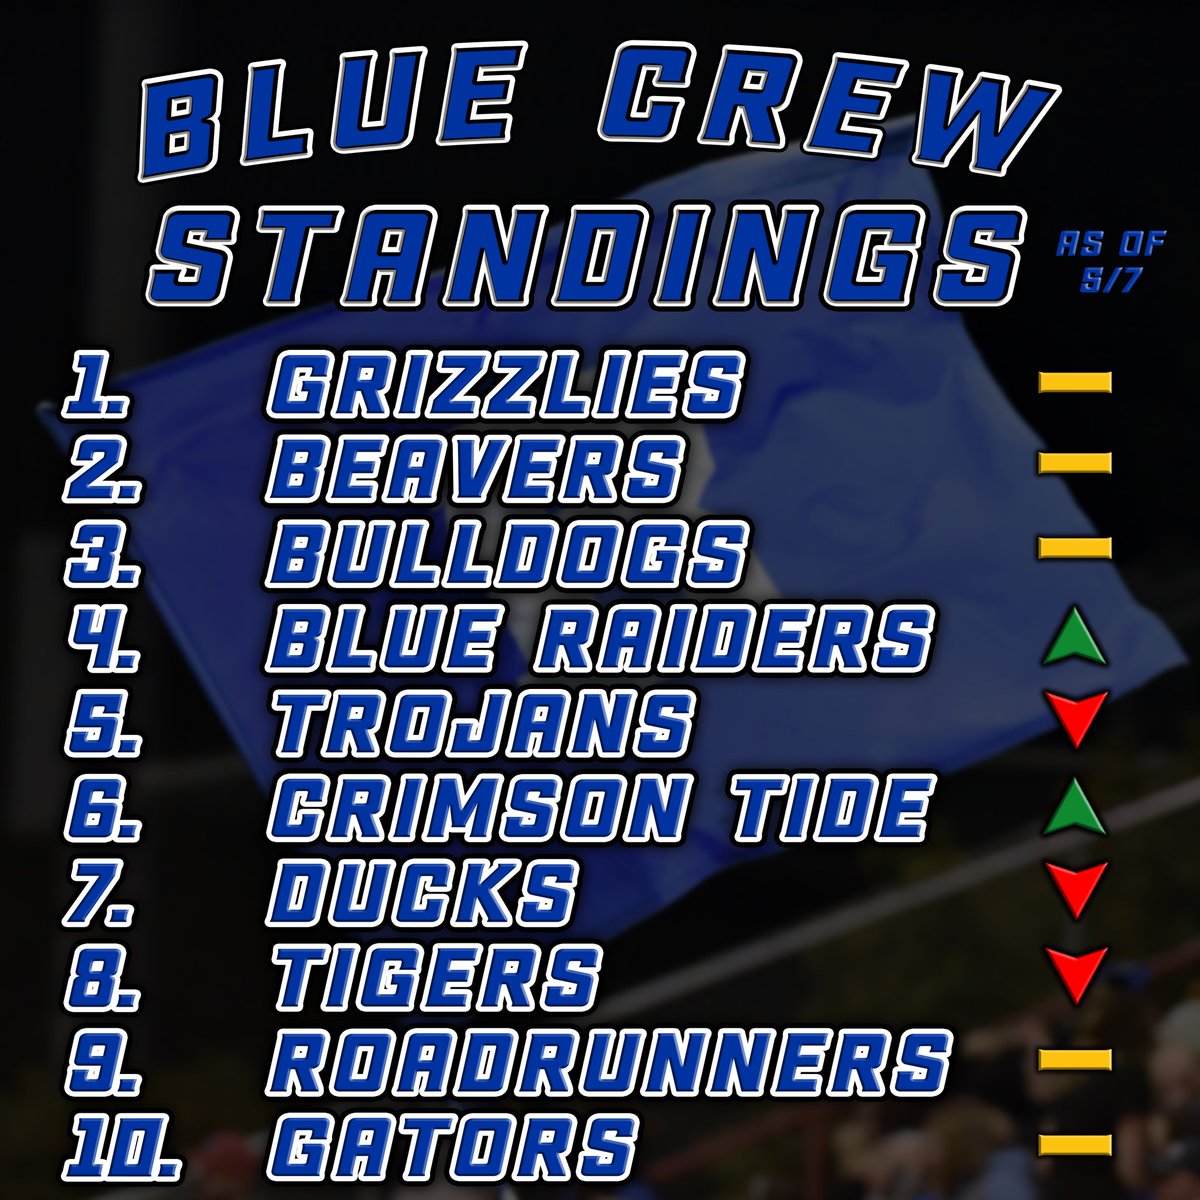 Grizzlies remain on top, while the Blue Raiders continue to climb the updated Blue Crew standings! #WeAreBothell | #BleedBlue